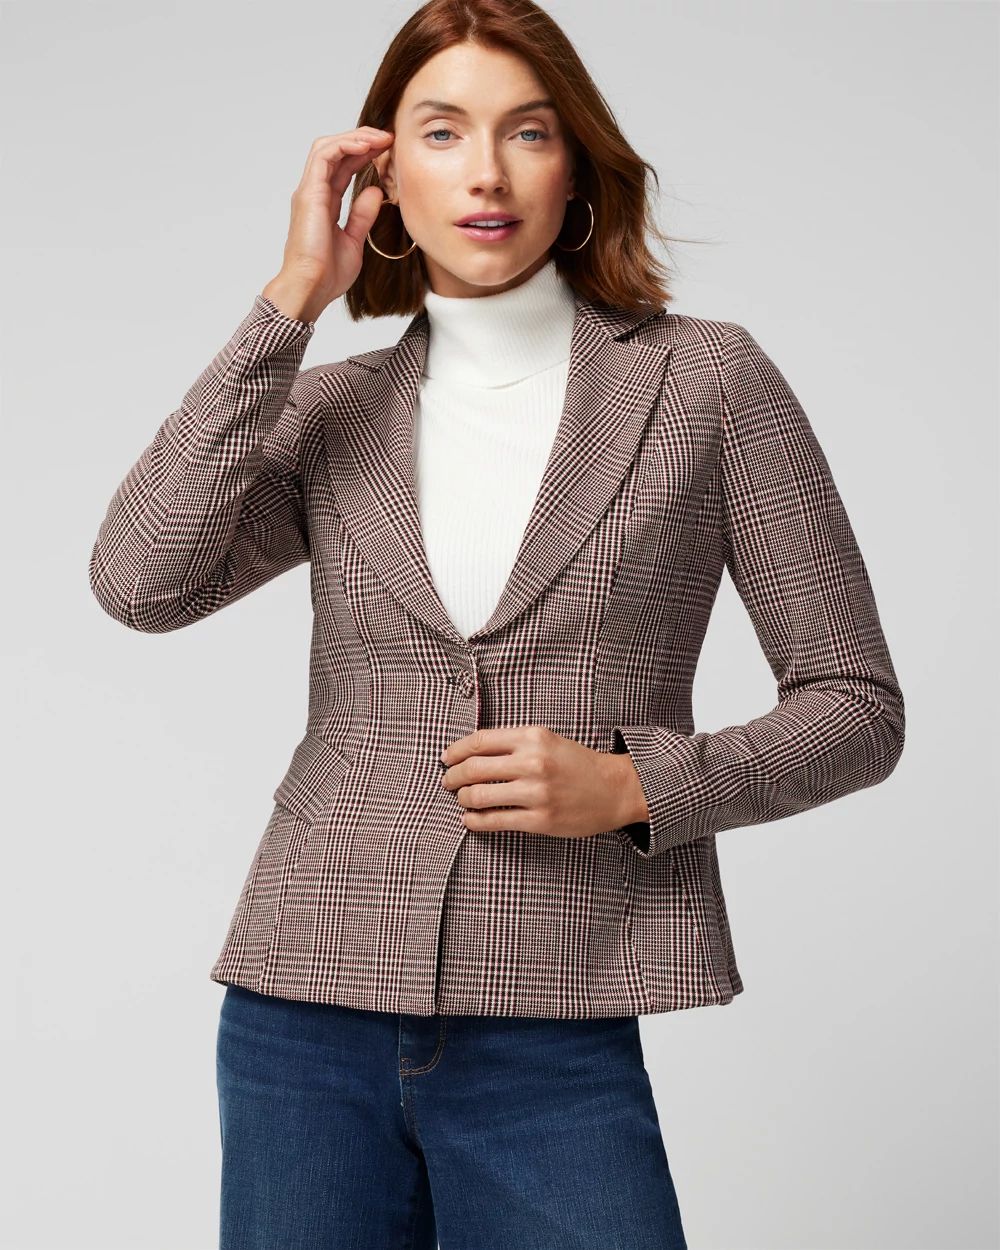 WHBM® Plaid Signature Blazer click to view larger image.